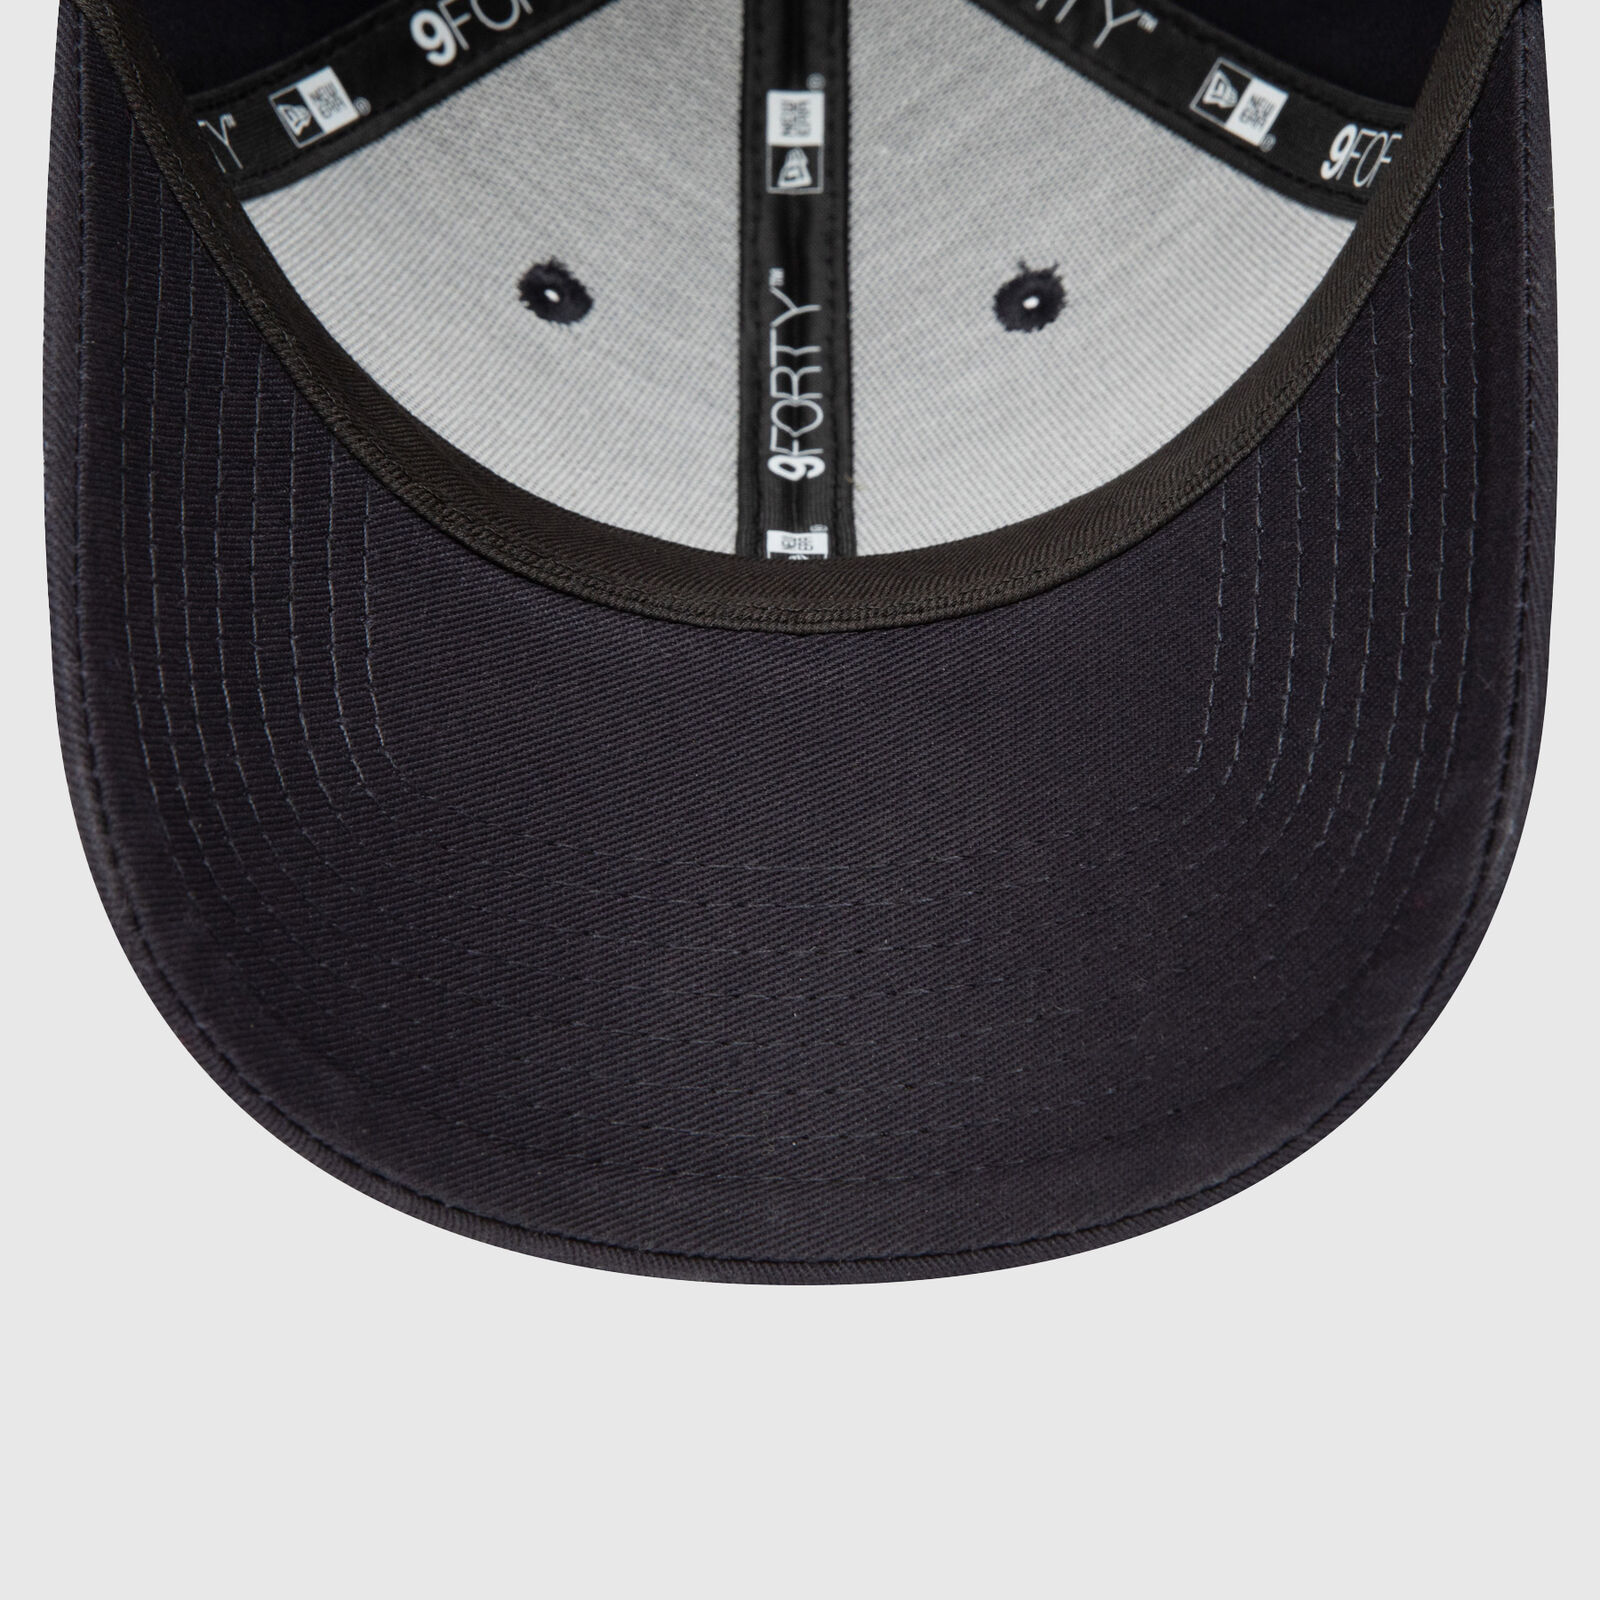 Essential New Era 9FORTY Cap - Red Bull Racing | Fuel For Fans